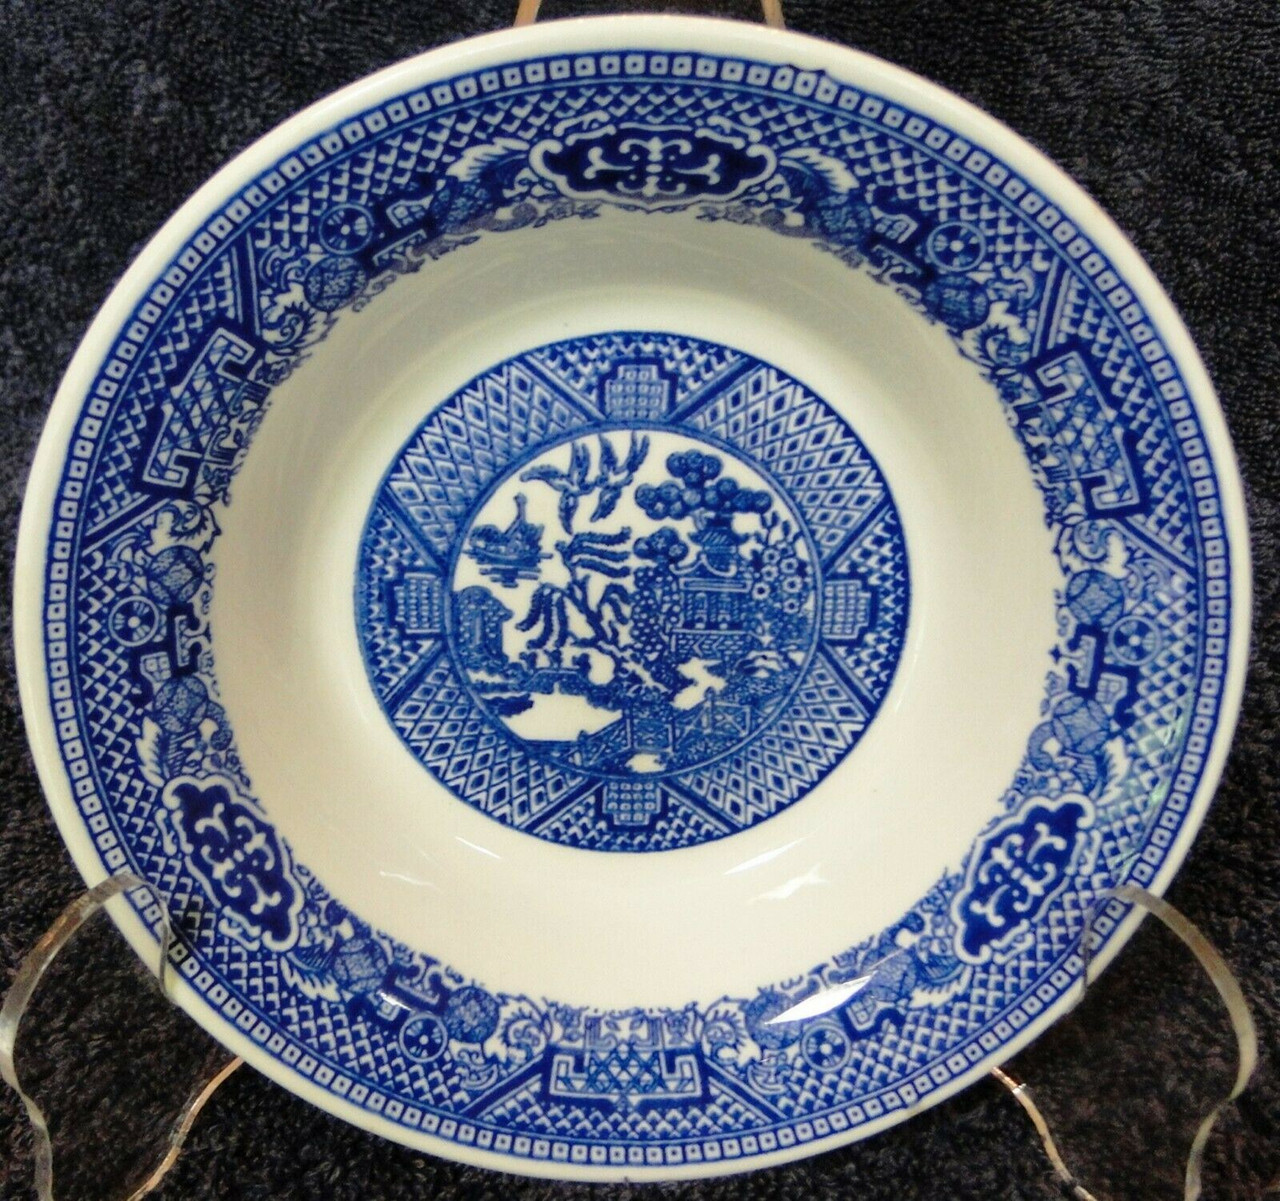 DR Vintage Dinnerware and Replacements